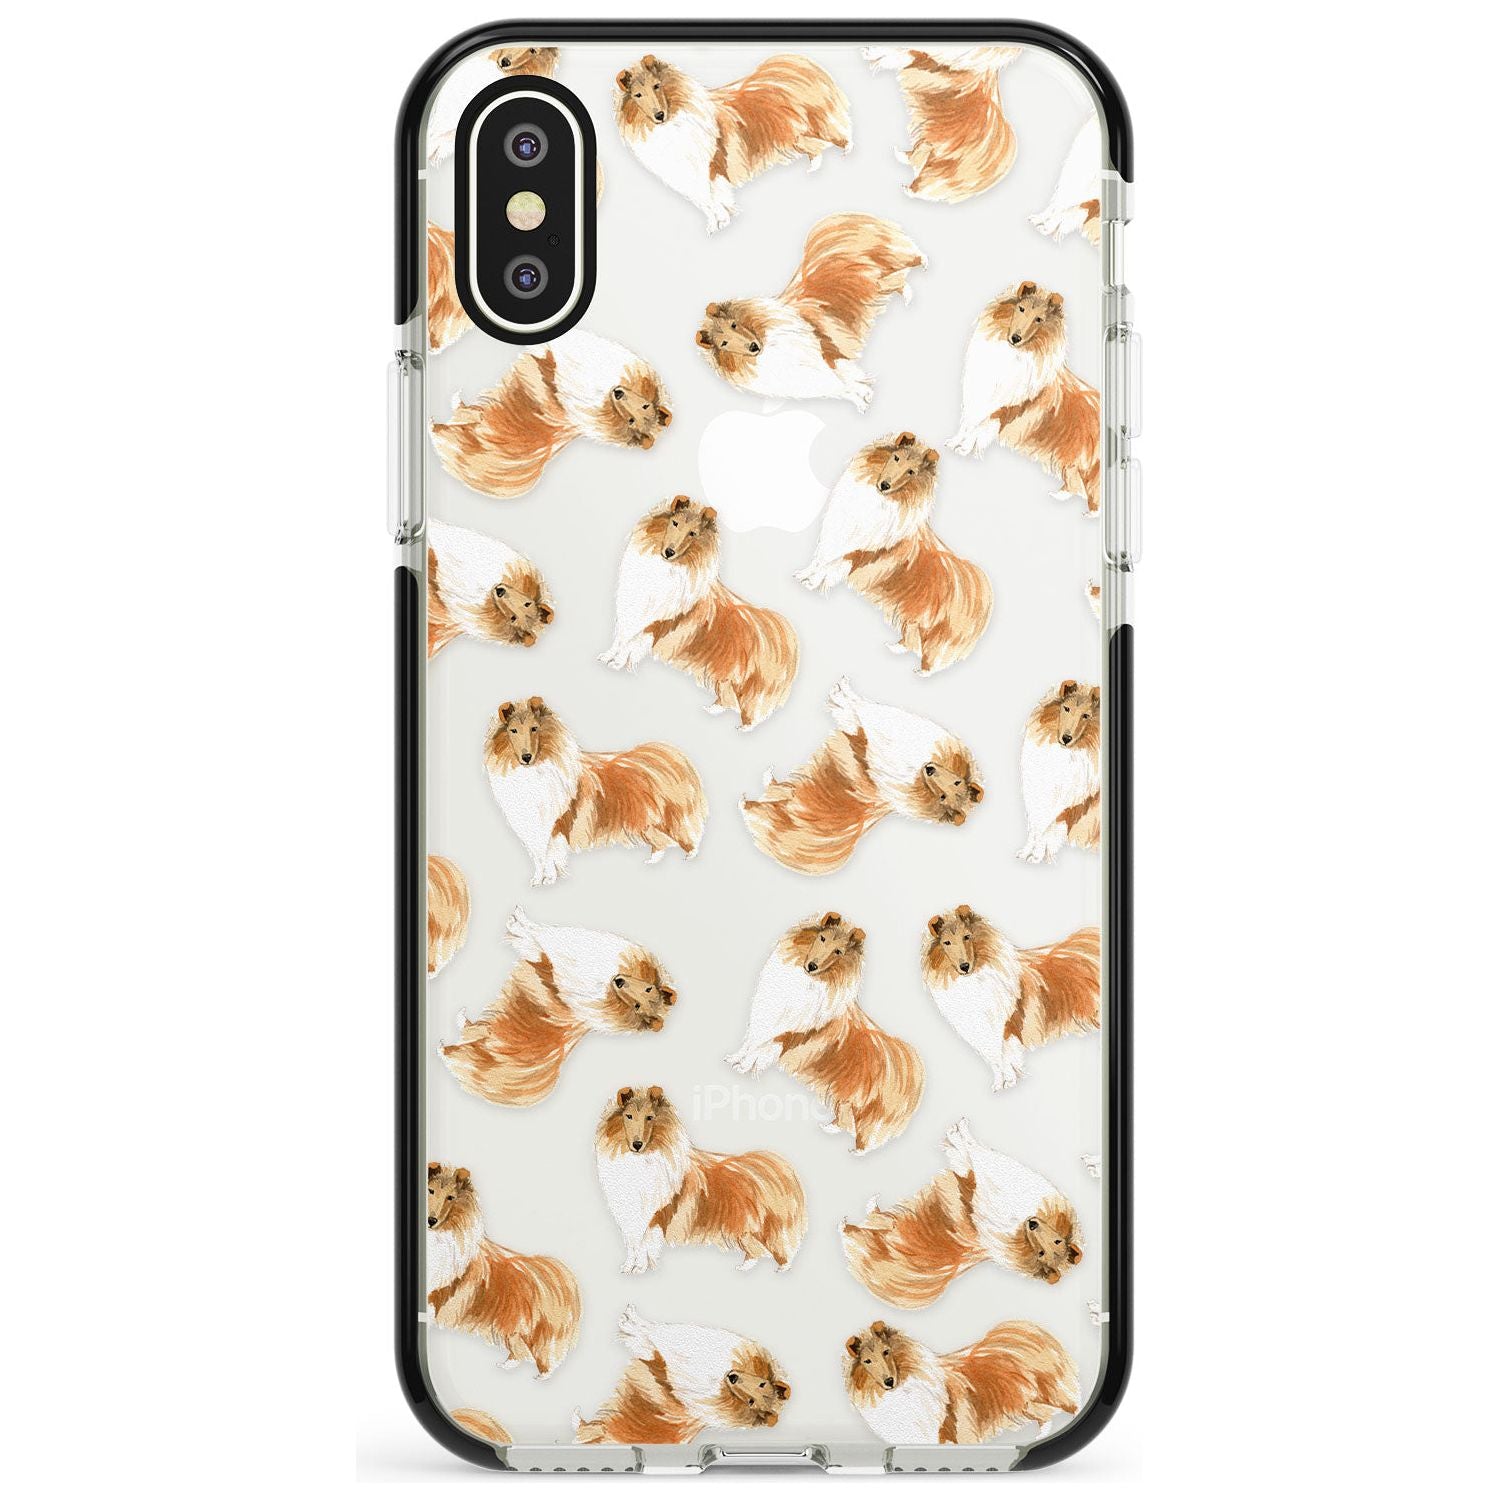 Rough Collie Watercolour Dog Pattern Black Impact Phone Case for iPhone X XS Max XR